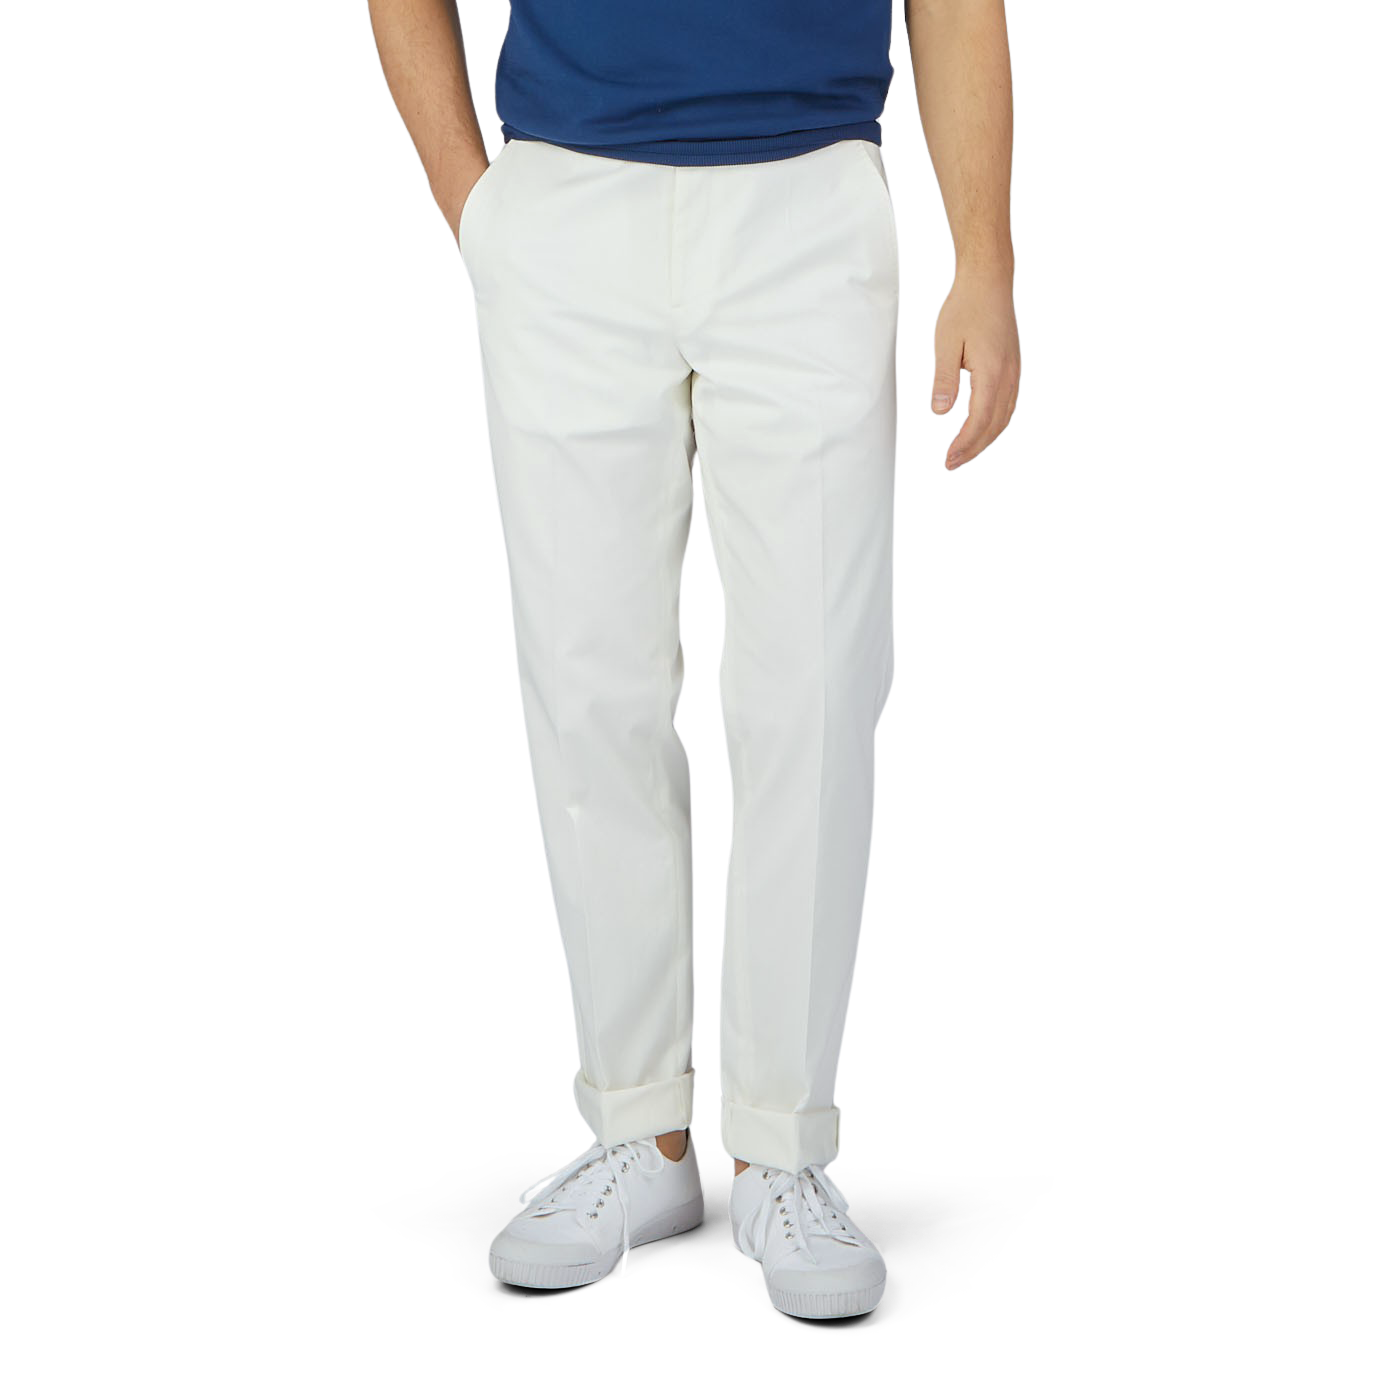 A man in a blue shirt and Luigi Bianchi Off-White Cotton Twill Flat Front Trousers.